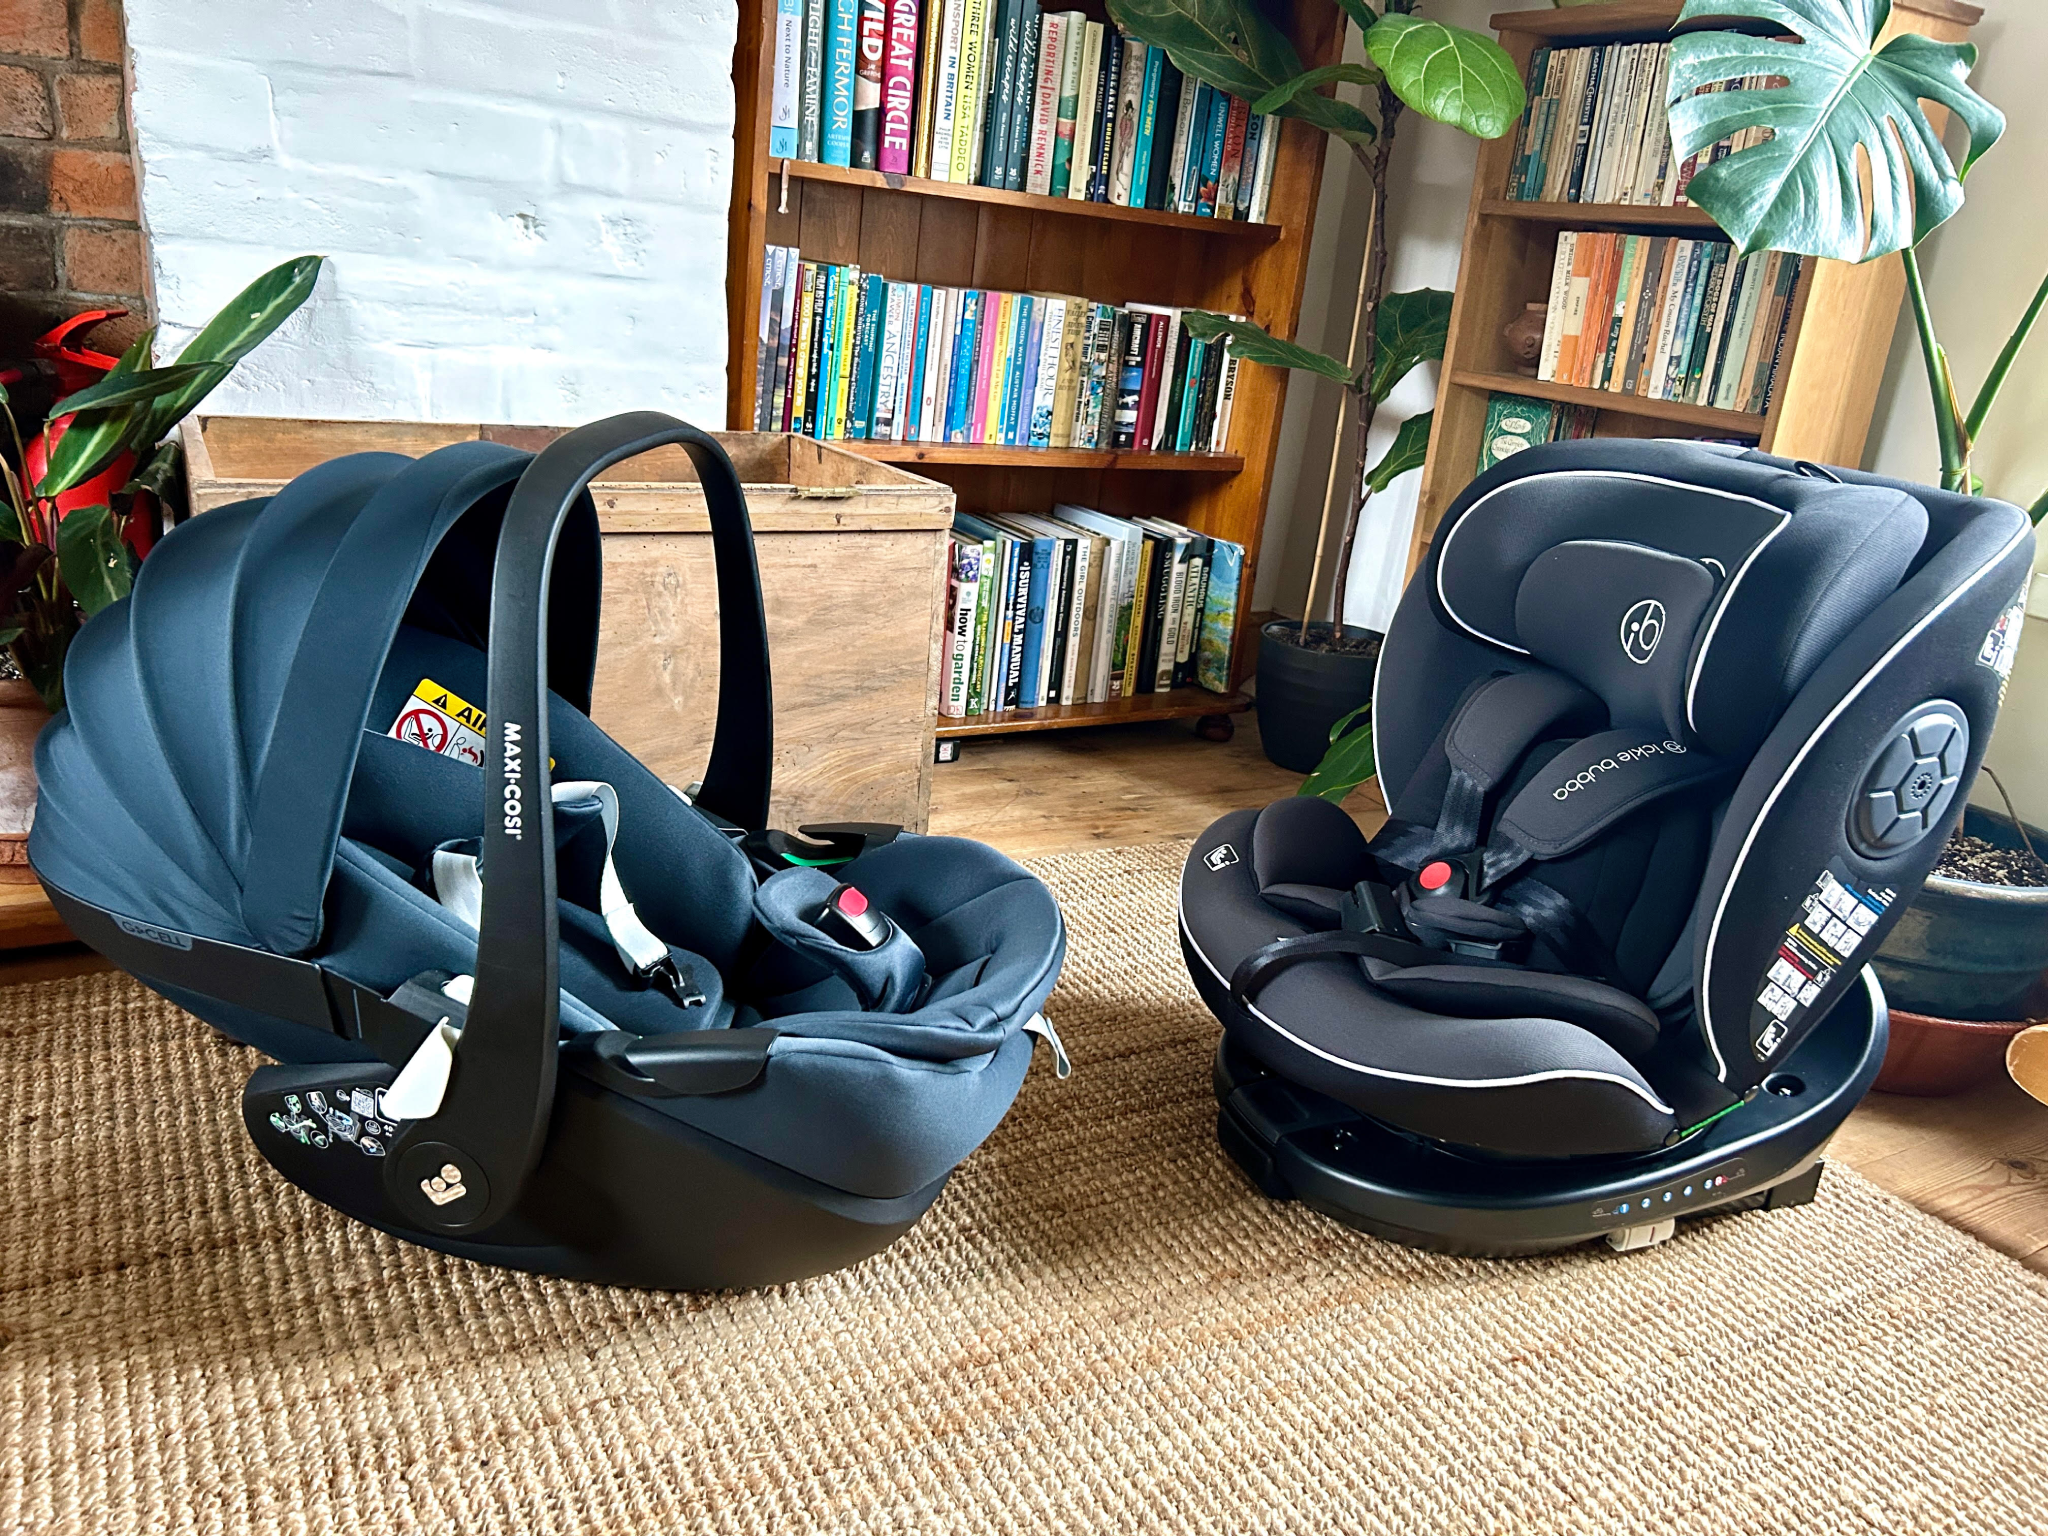 We tested a range of car seats for babies